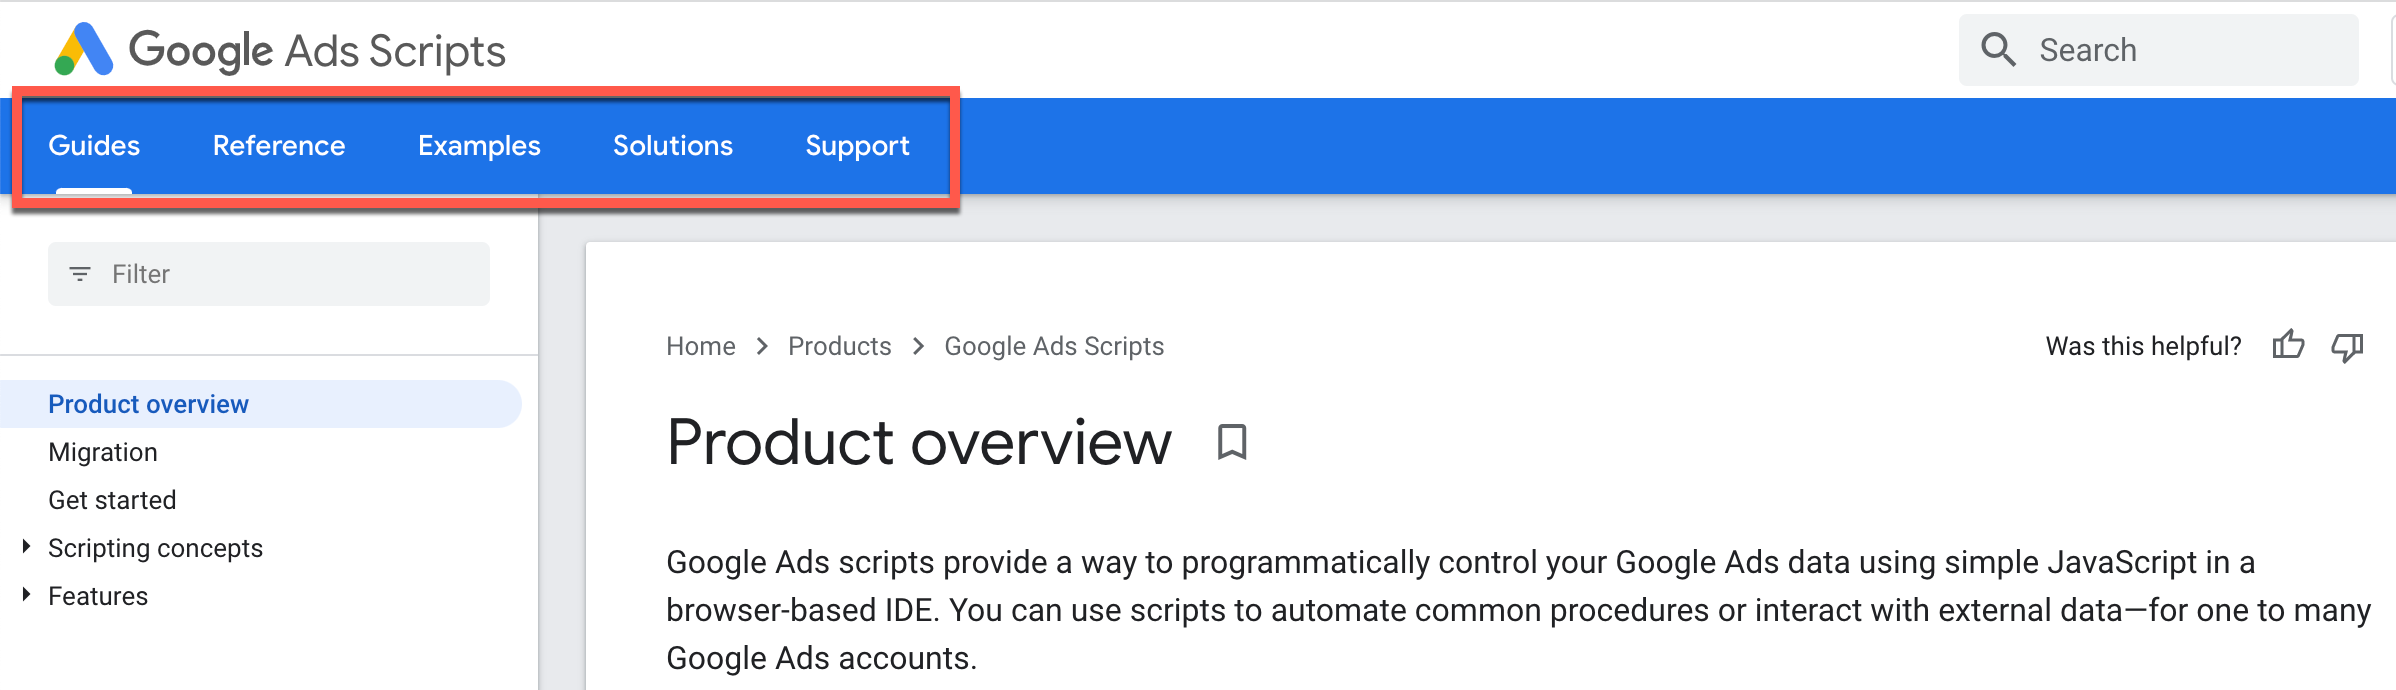 Sections in Google Ads script pages